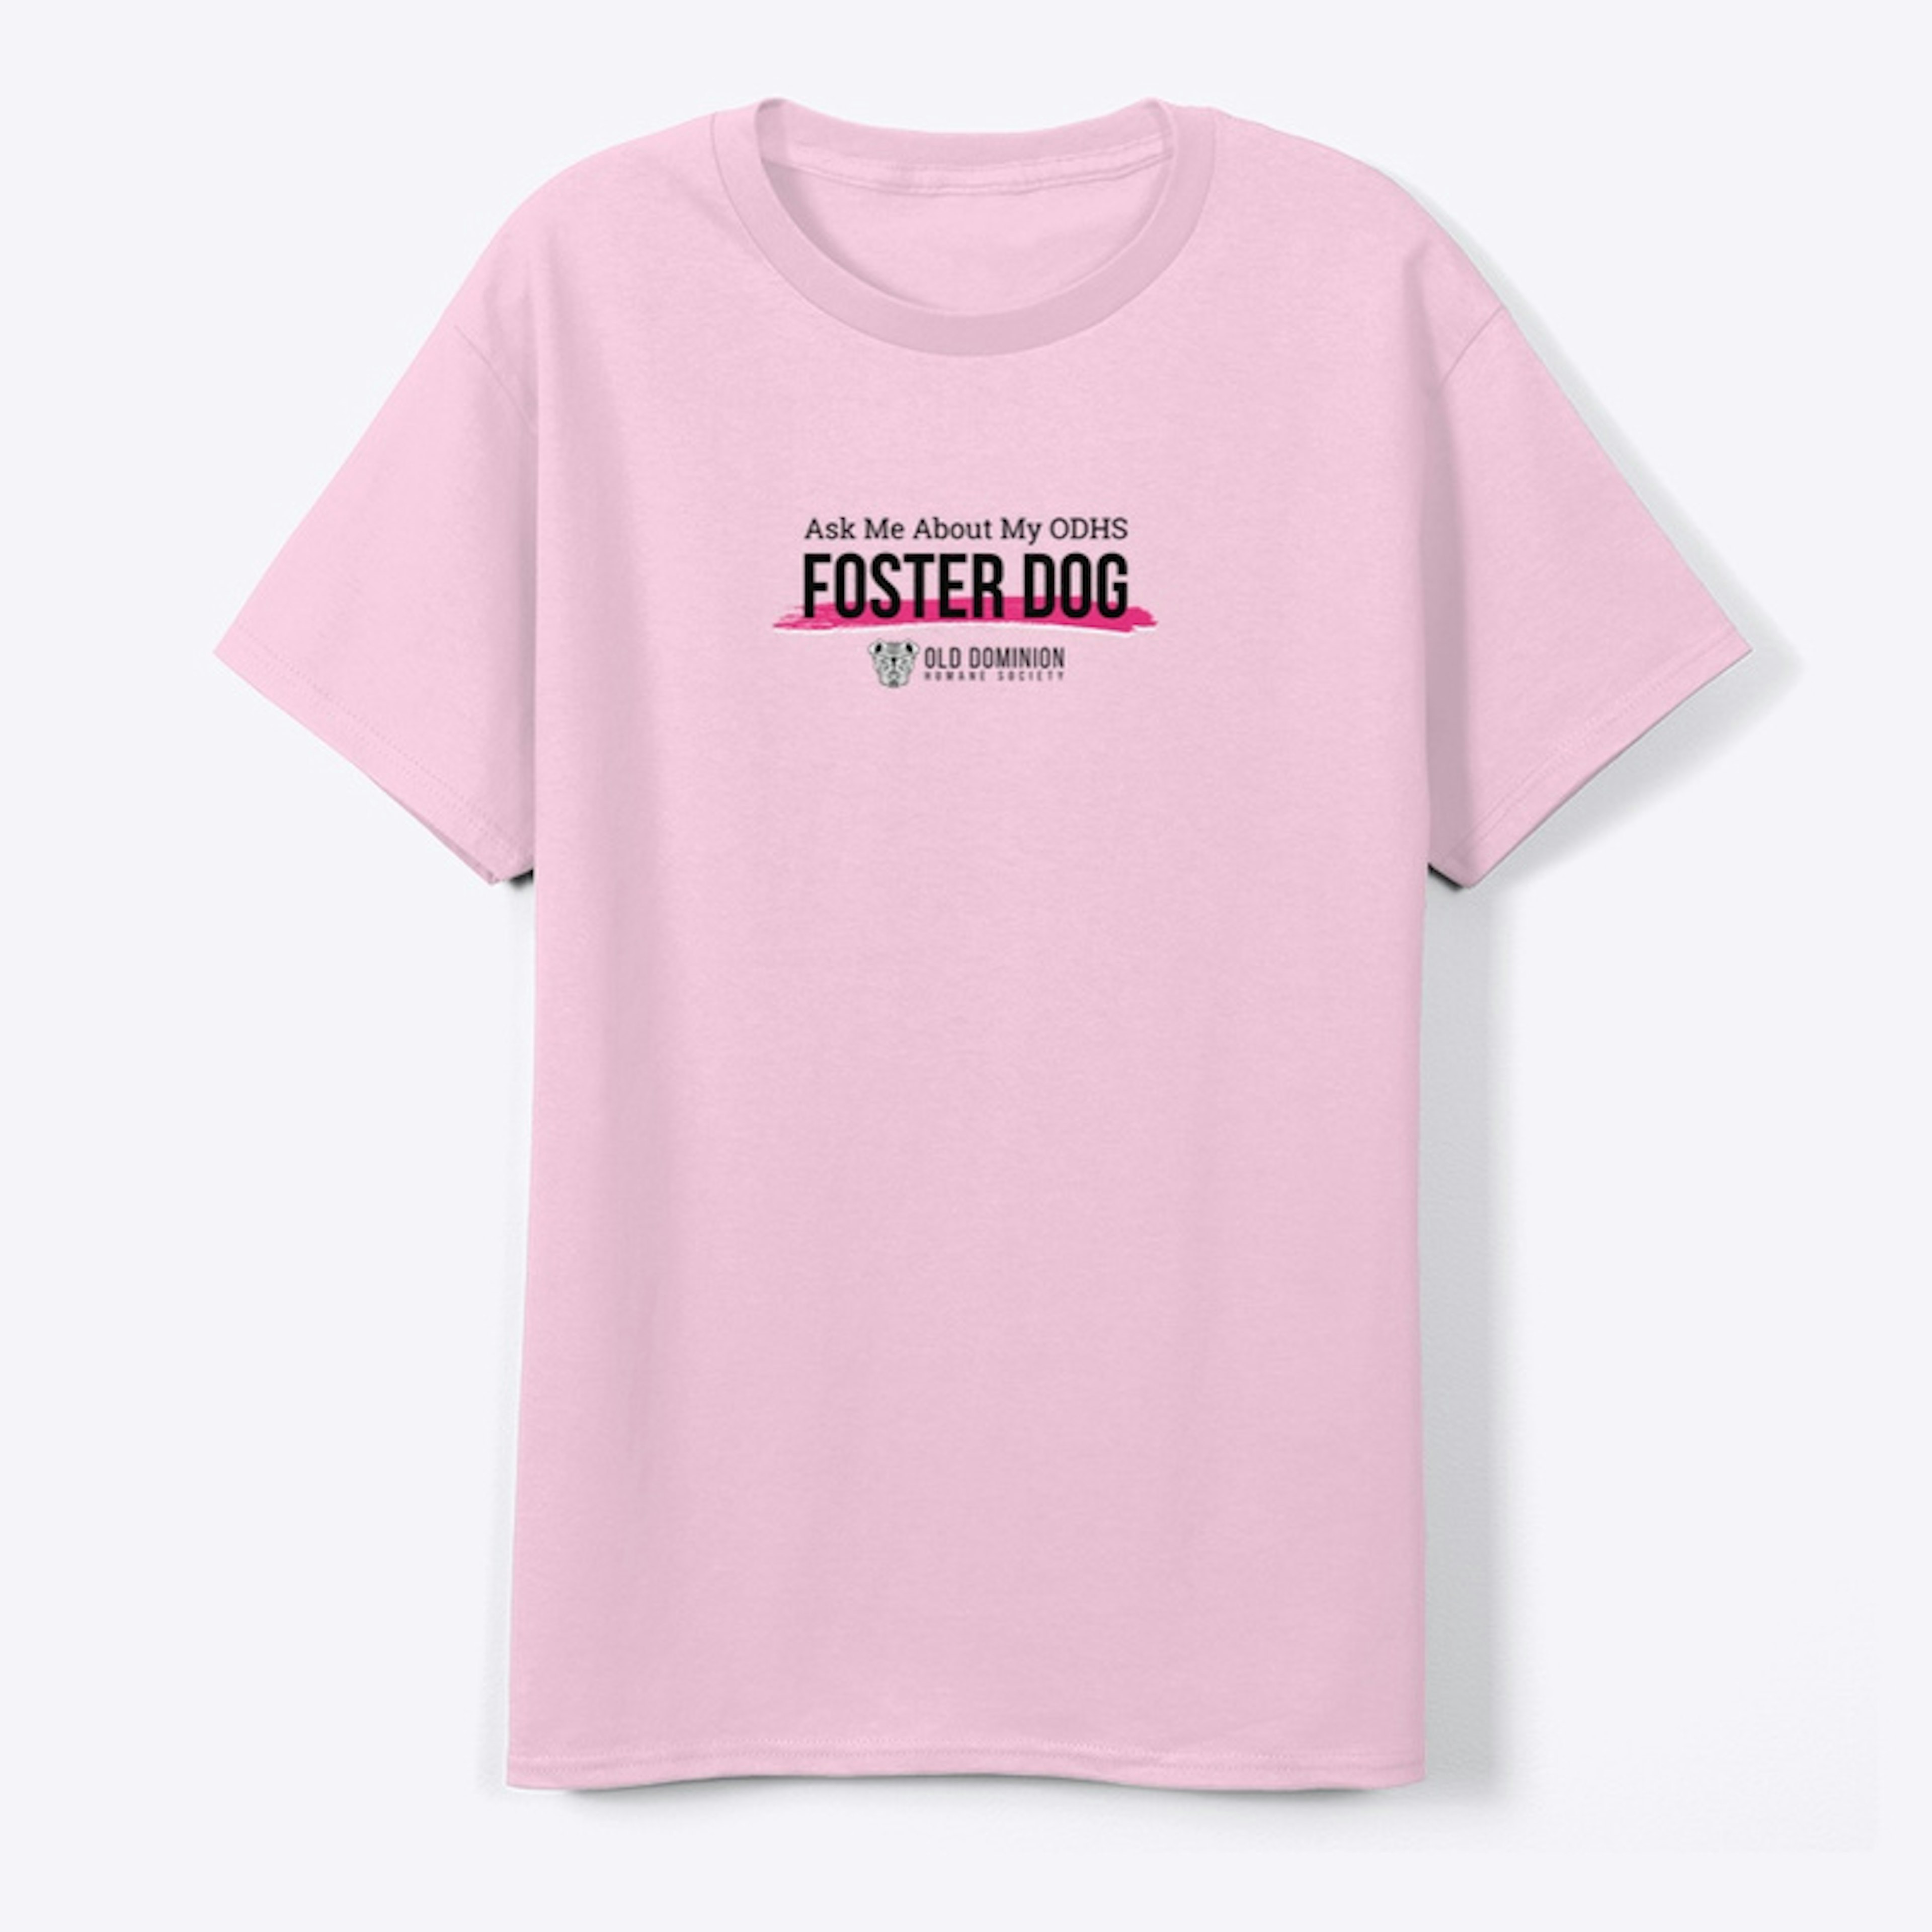 ODHS Foster “Ask Me” T-shirt